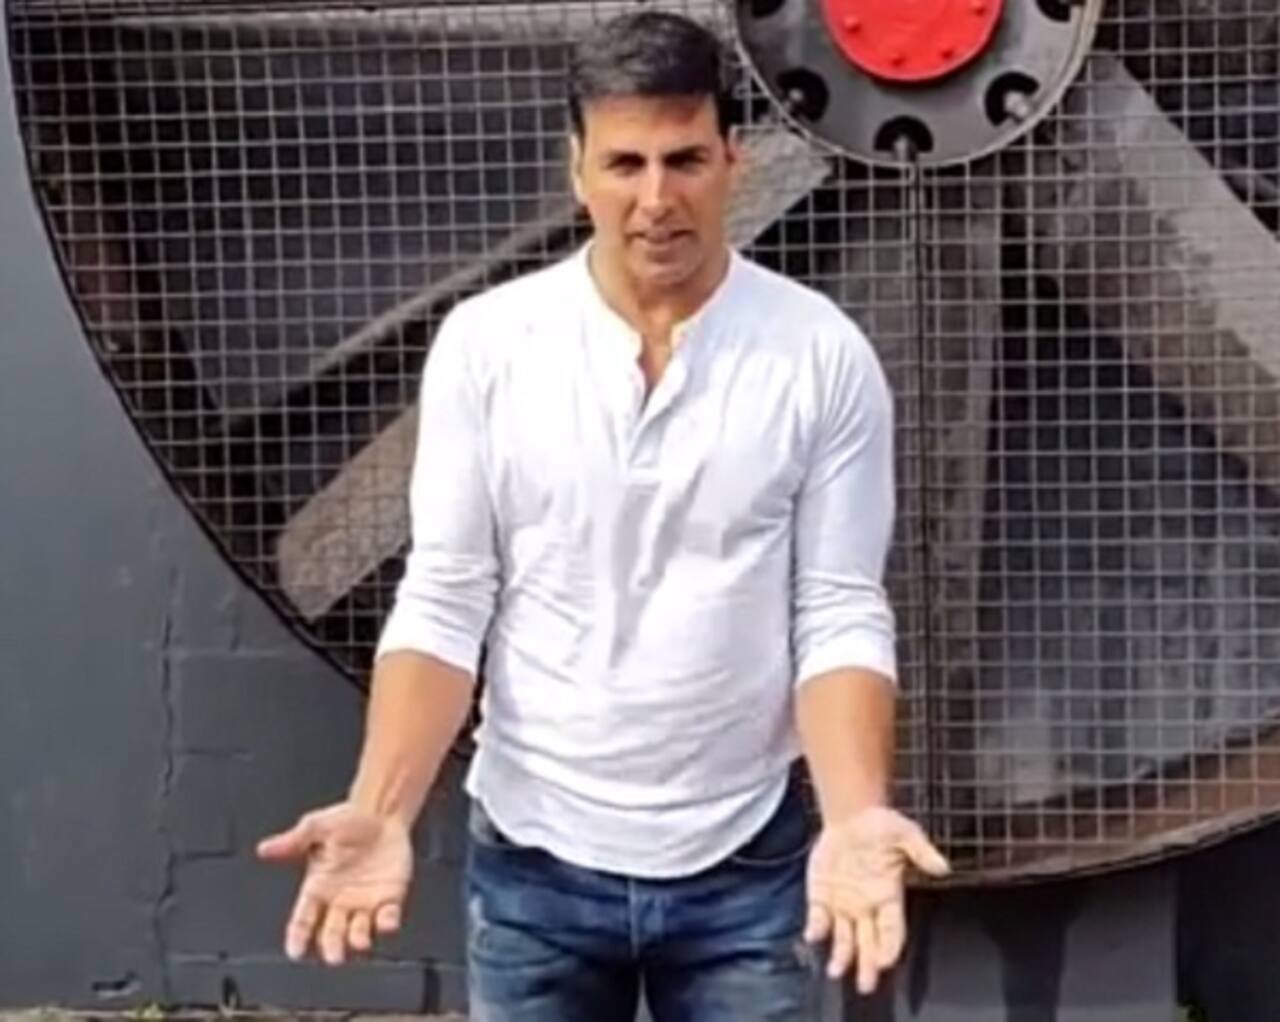 Akshay Kumar takes the ALS ice bucket challenge on being nominated by Riteish Deshmukh- Watch video!